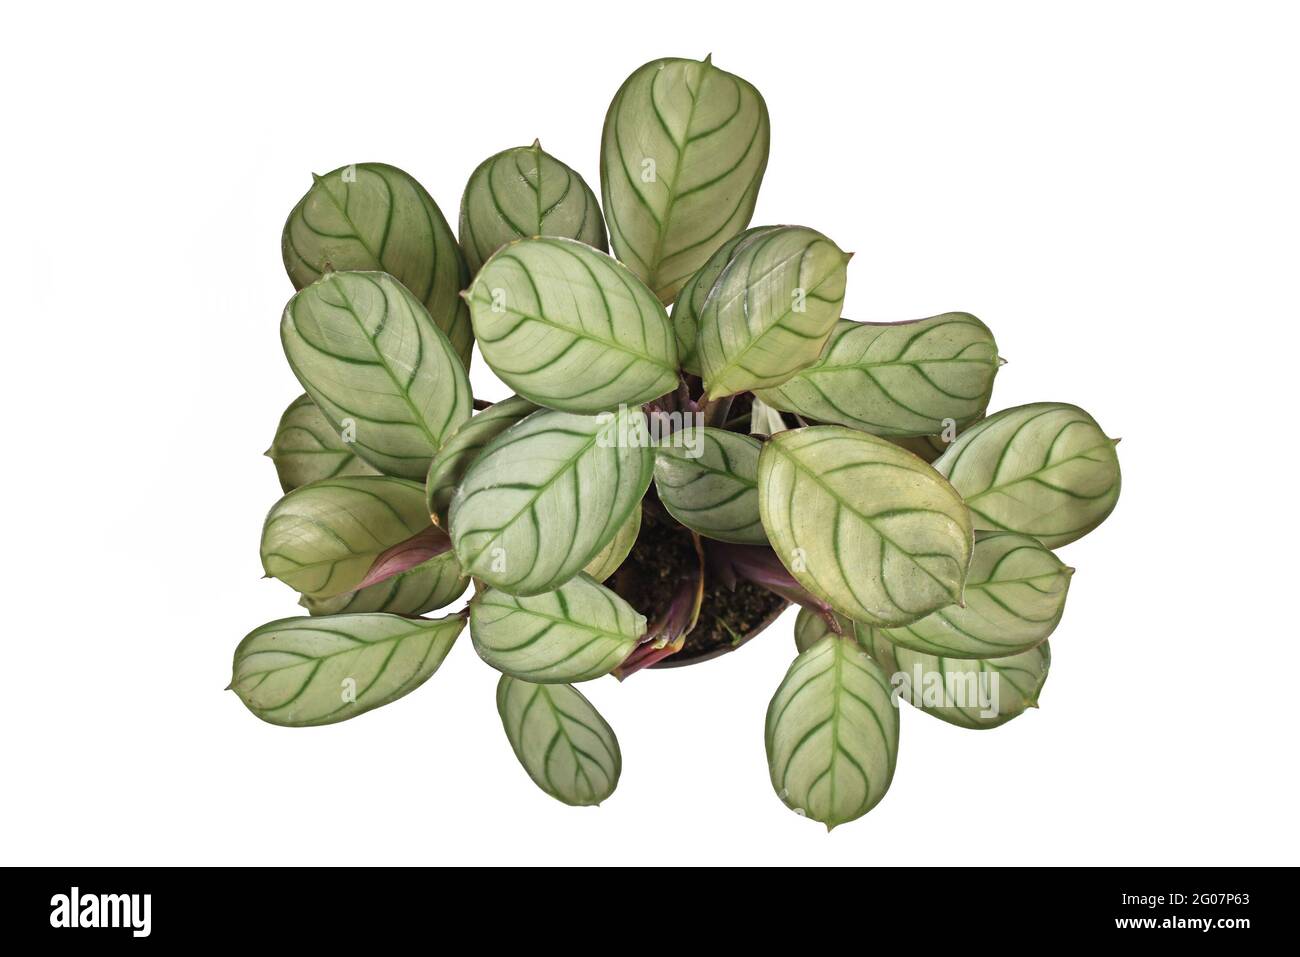 Top view of tropical 'Ctenanthe Burle Marxii Amagris' houseplant with dark green vein pattern isolated on white background Stock Photo